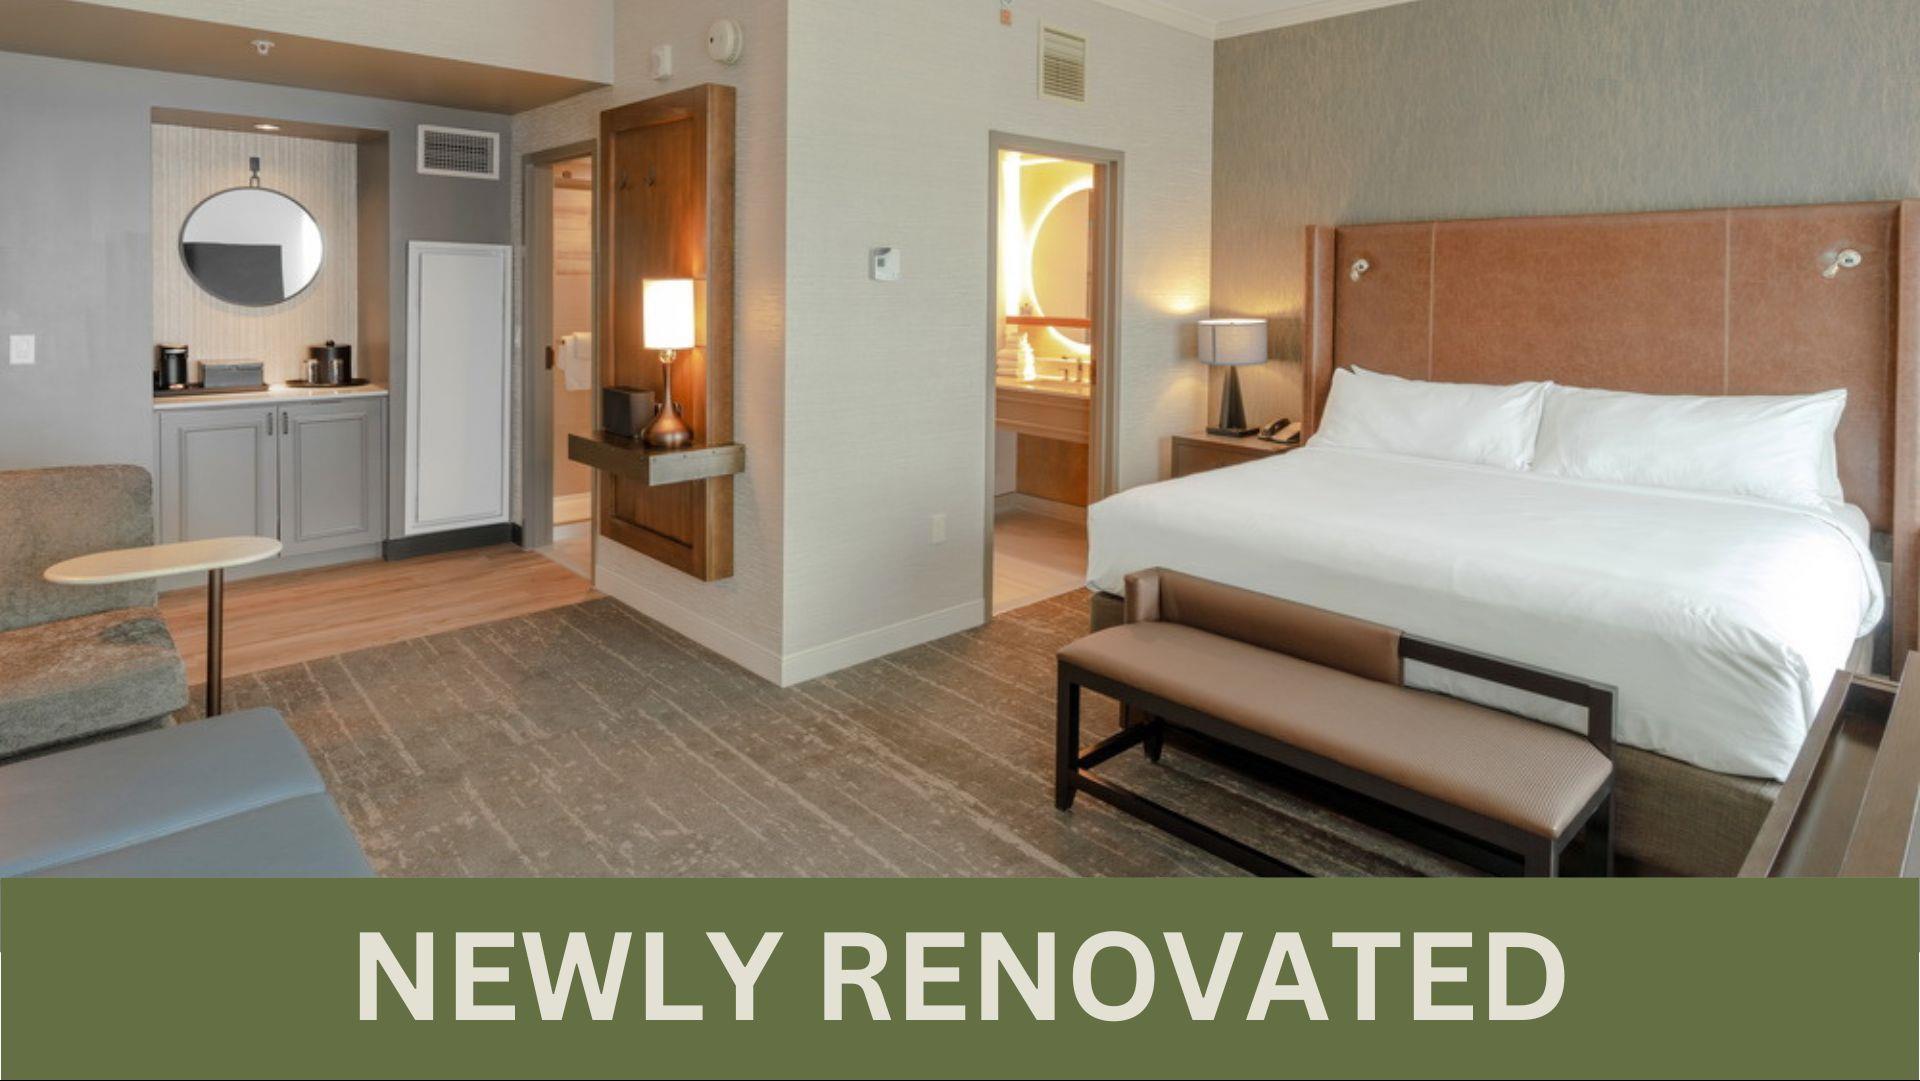 Renaissance Boulder Flatiron Hotel - Newly Renovated in Broomfield, CO